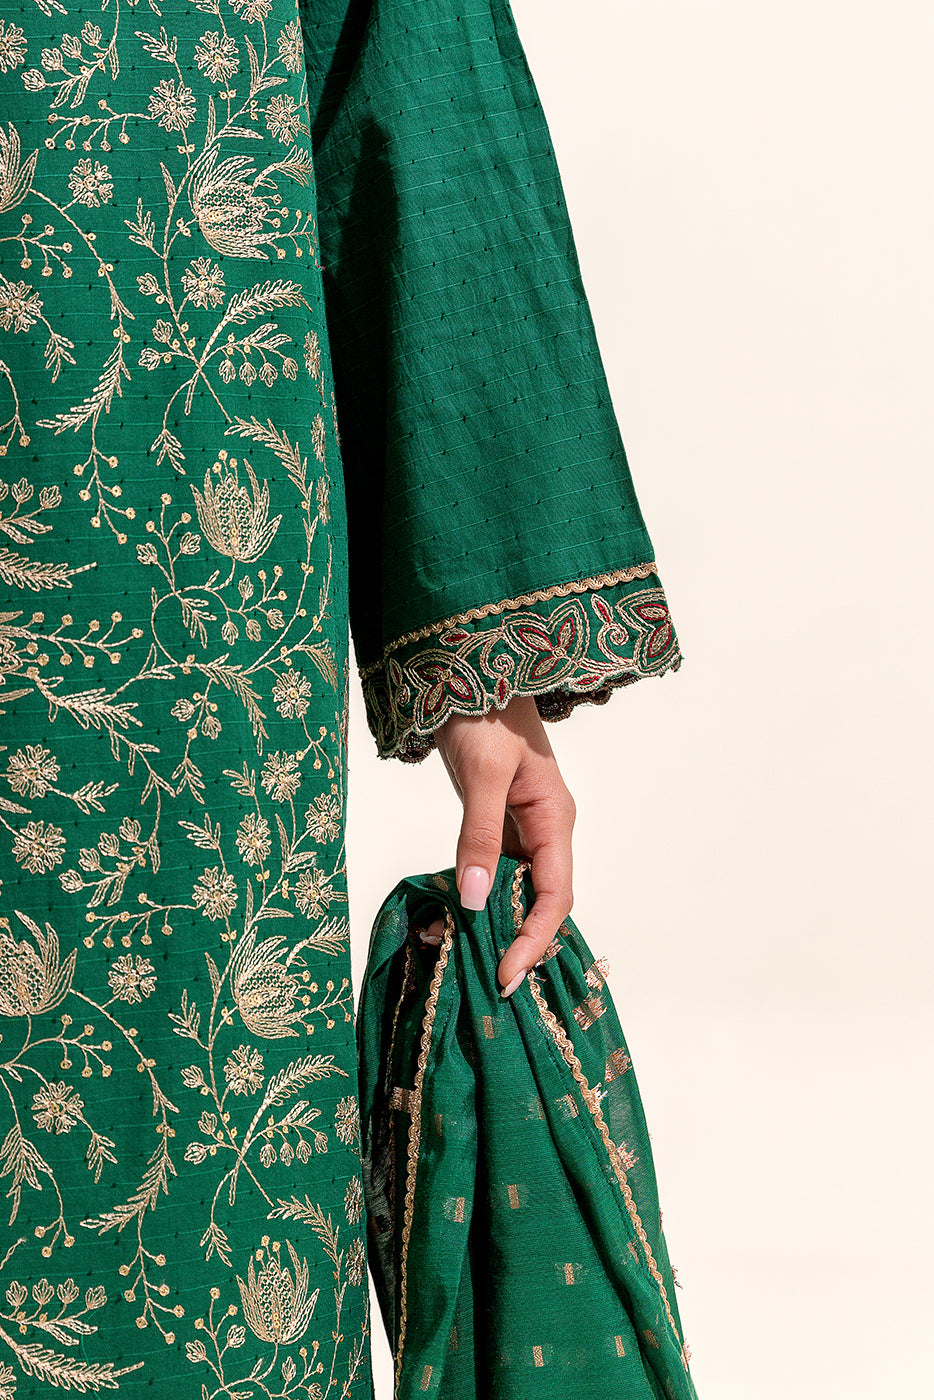 3 PIECE EMBROIDERED JACQUARD SUIT (UNSTITCHED)